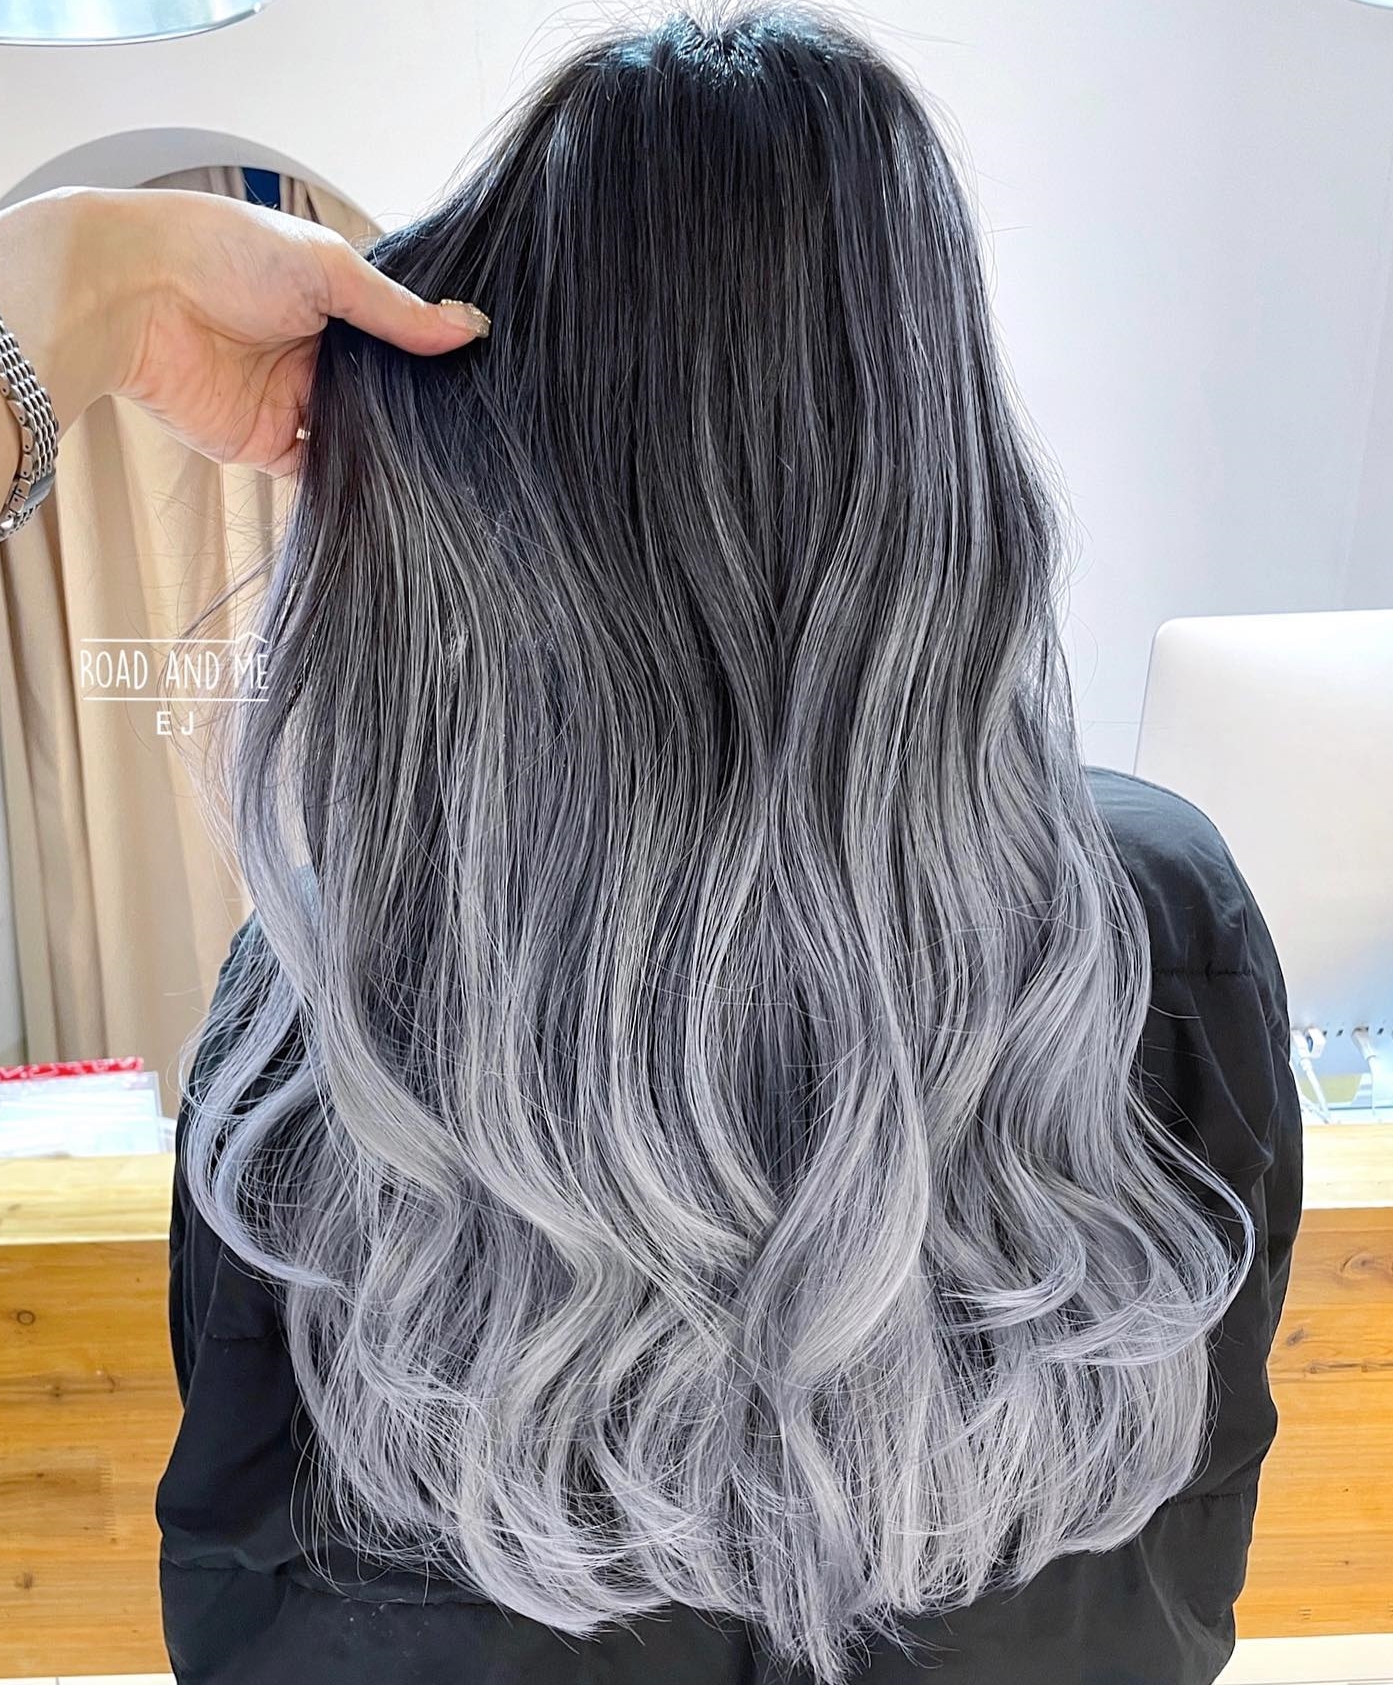 Long Hair with Black Roots and Gray Ombre Hair Ends